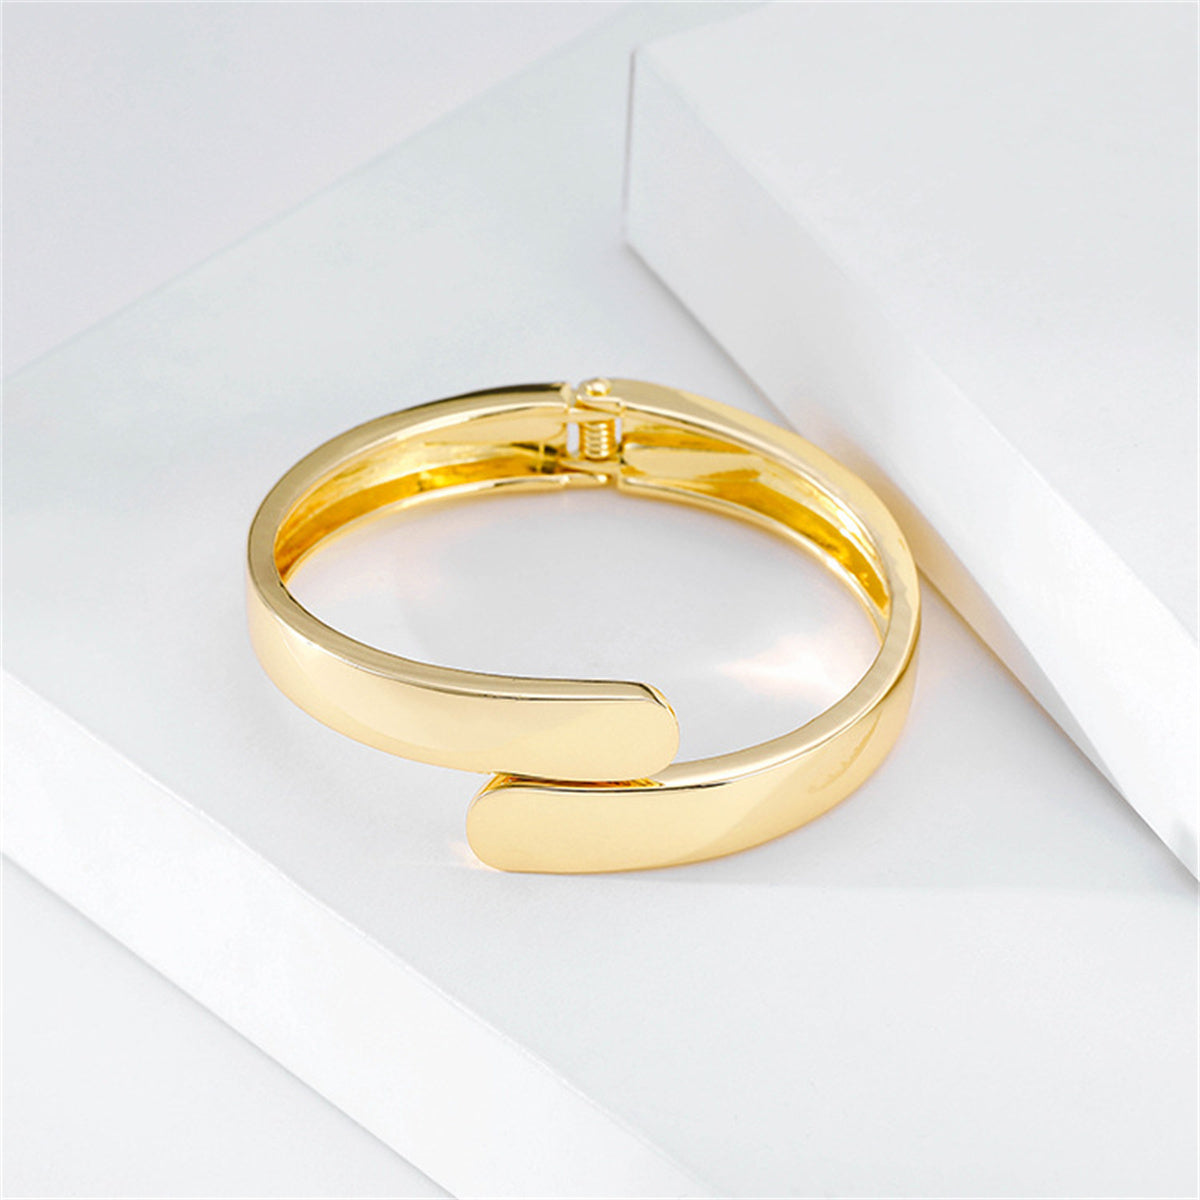 18K Gold-Plated Bypass Hinge Bangle